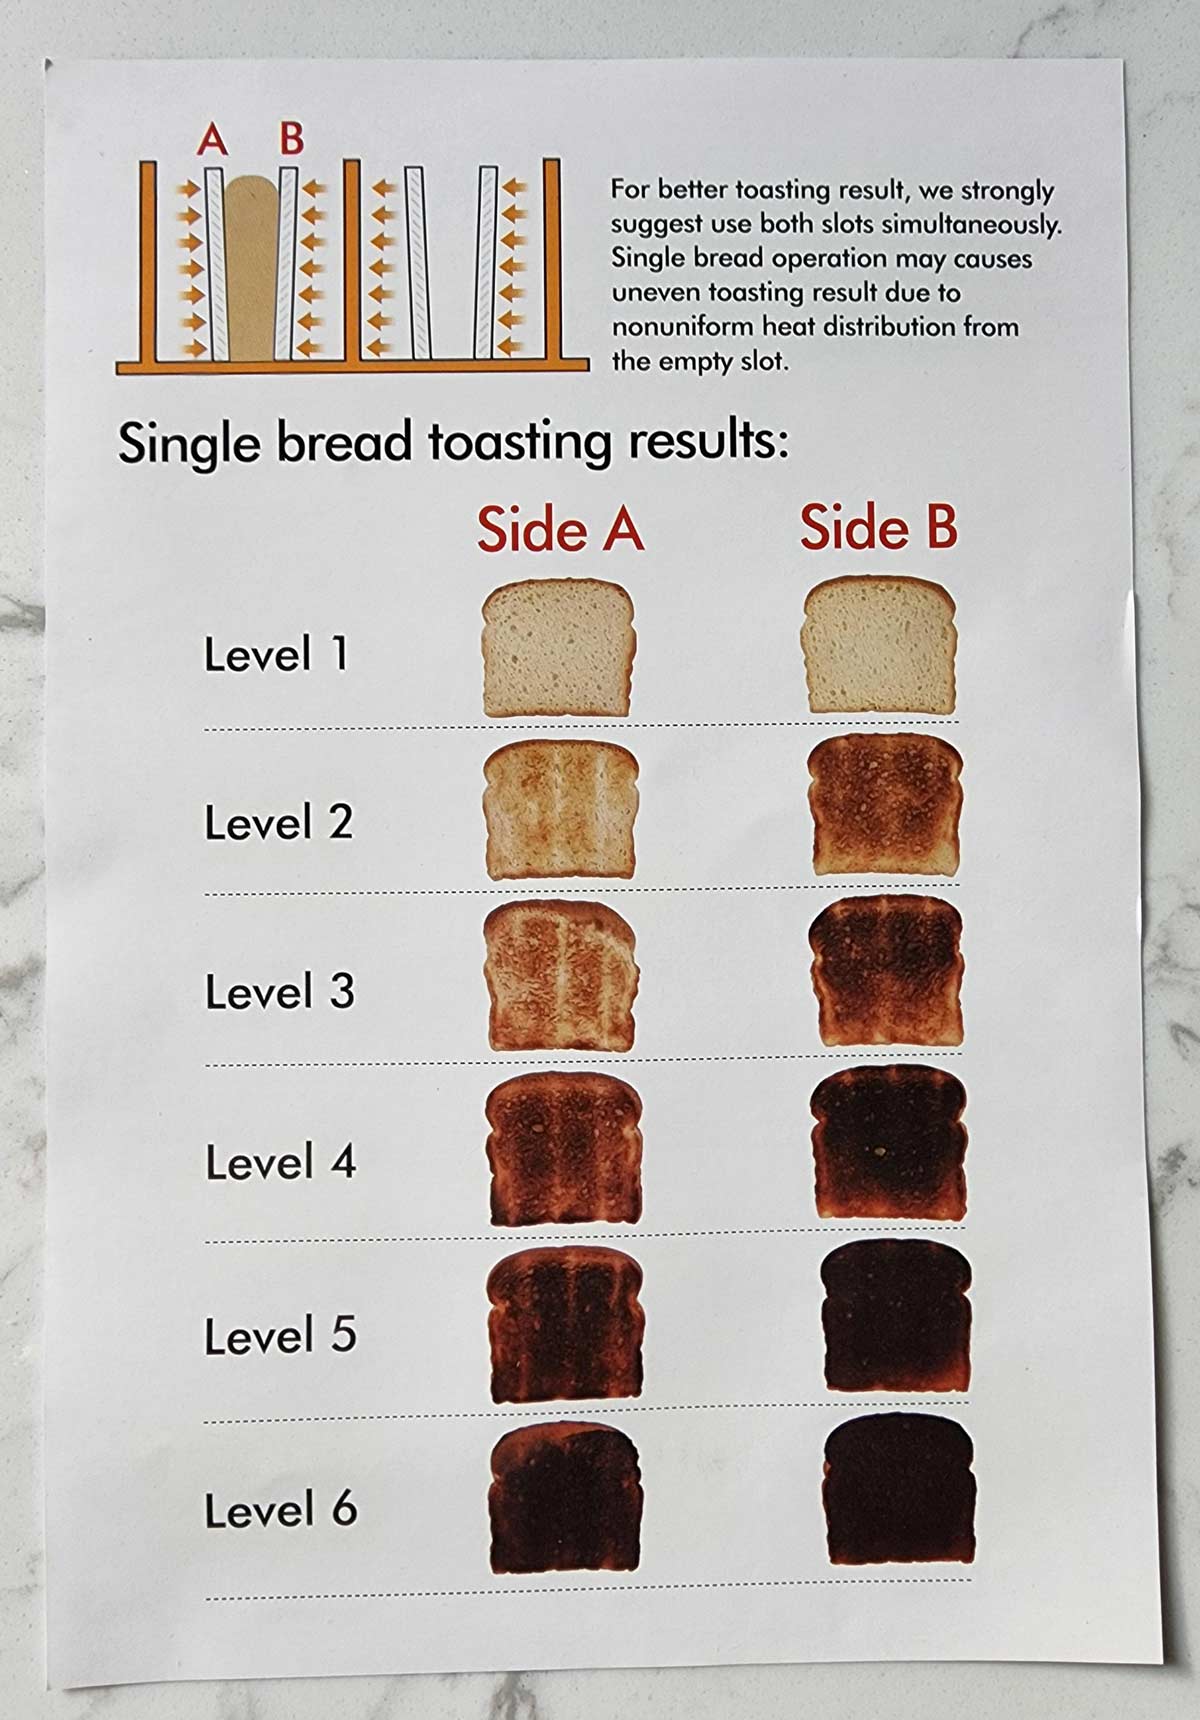 Who the hell is eating level 6 toast???